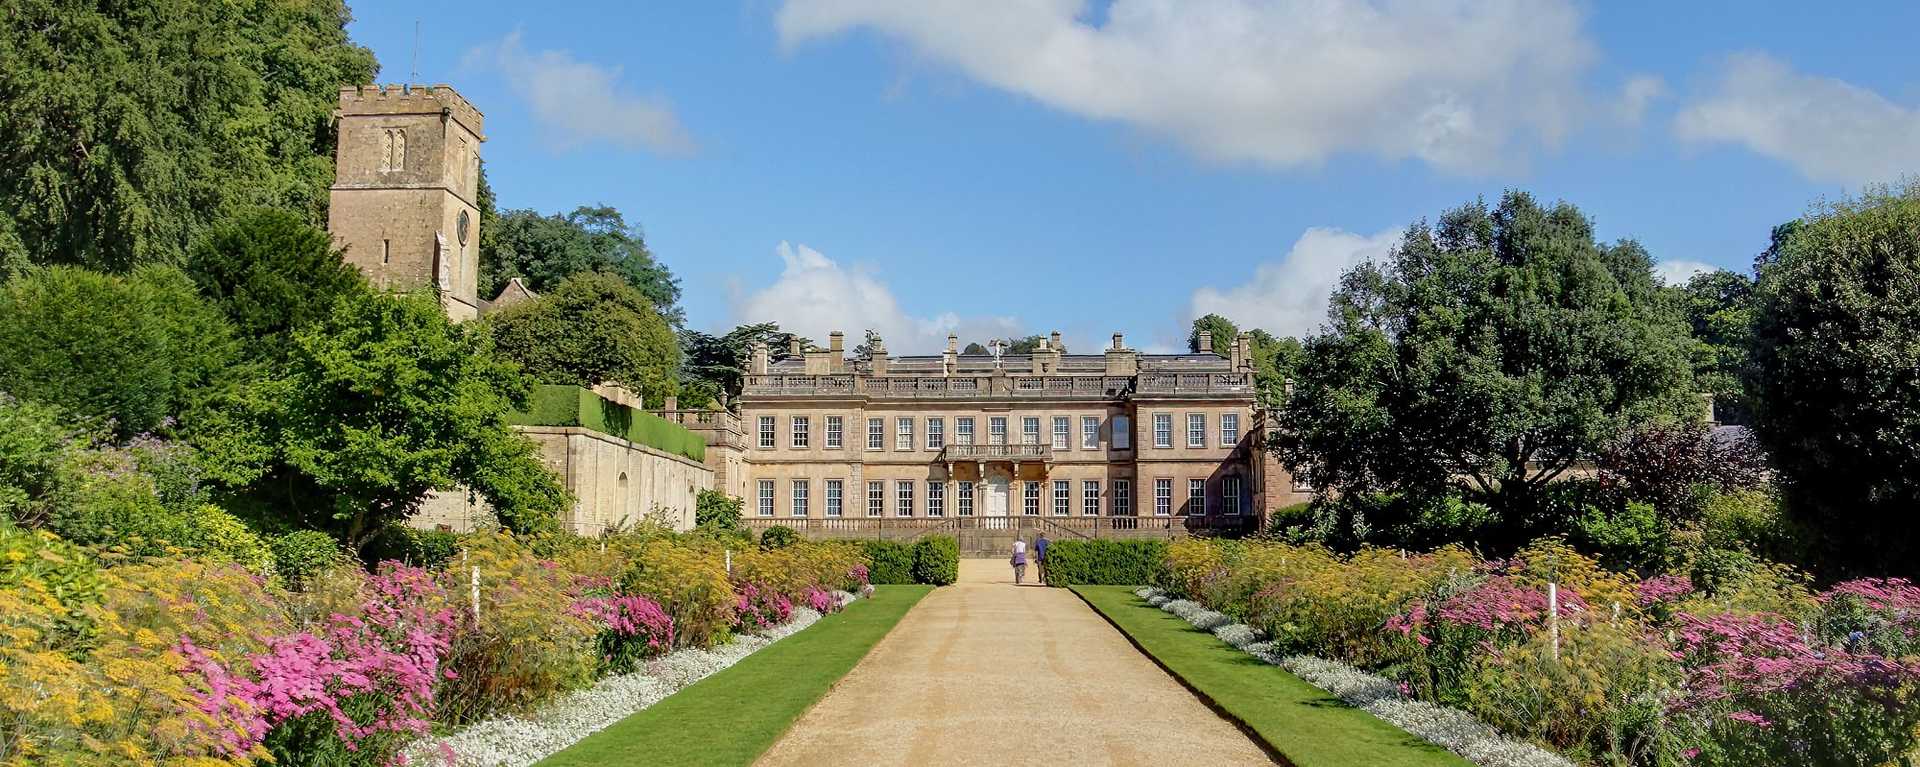 Dyrham Park, a baroque English country house in South Gloucestershire, England